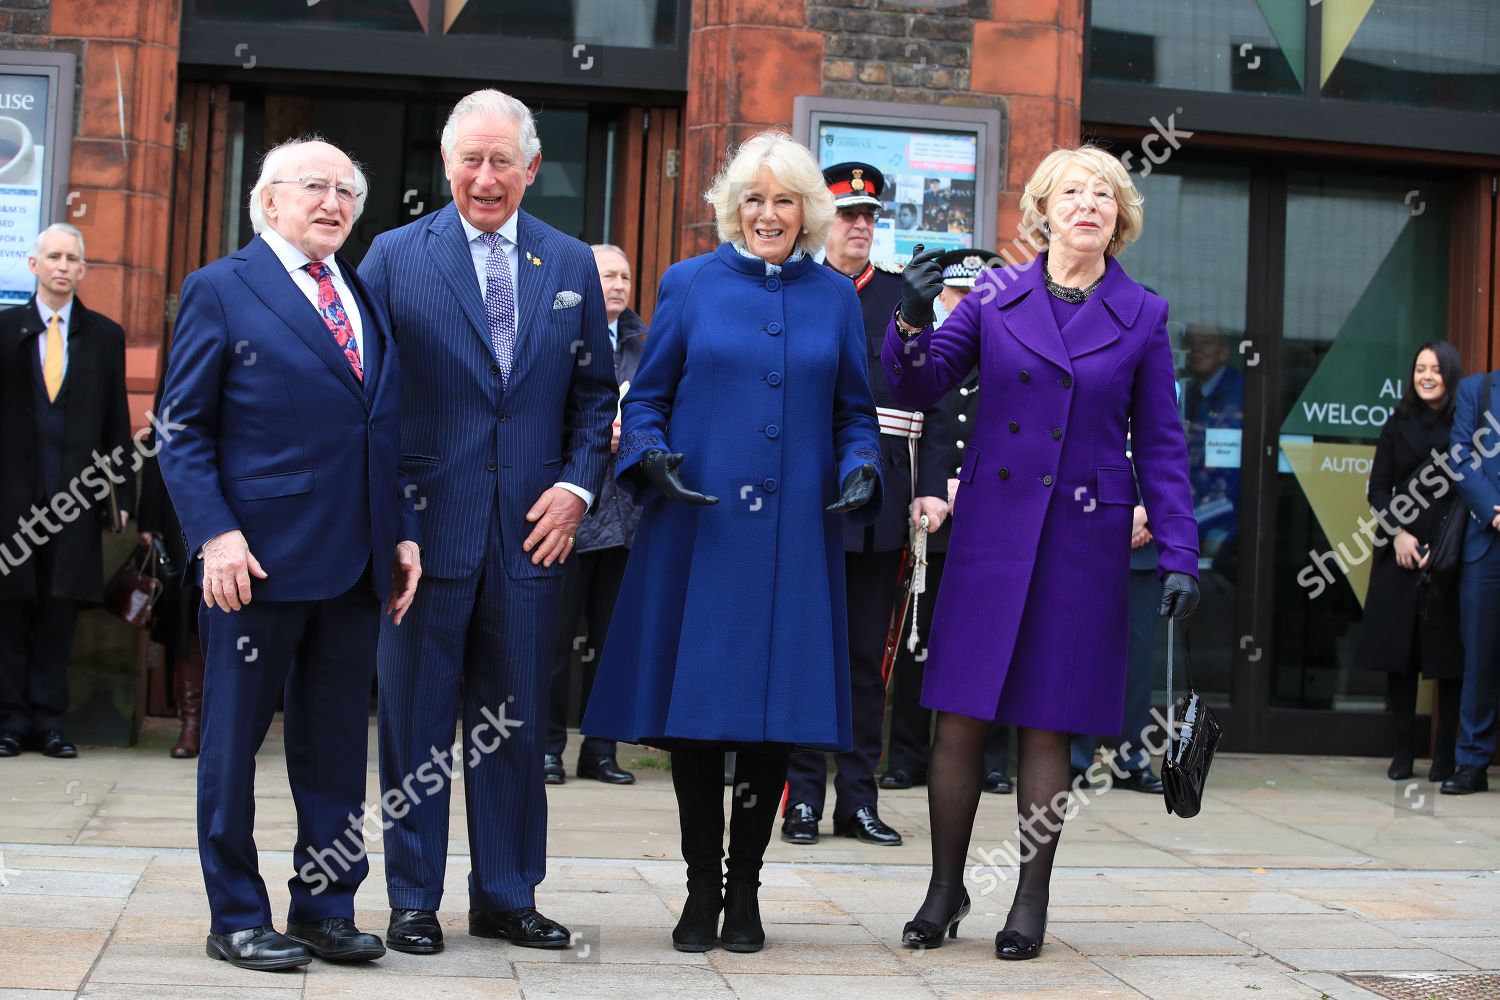 prince-charles-and-duchess-of-cornwall-visit-liverpool-uk-shutterstock-editorial-10102607i.jpg